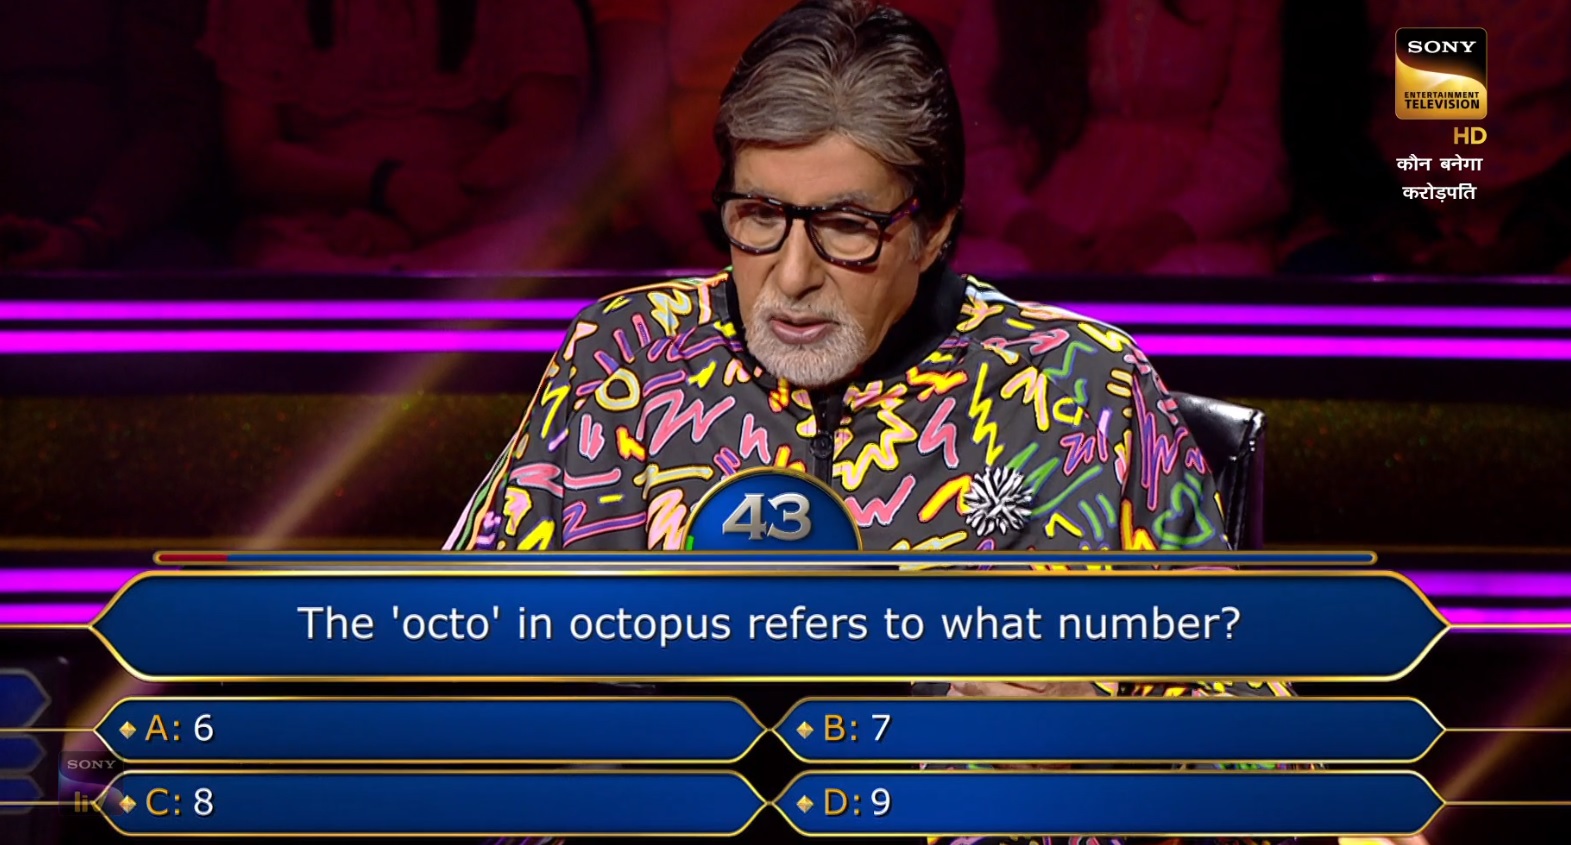 Ques : The ‘octo’ in octopus refers to what number?